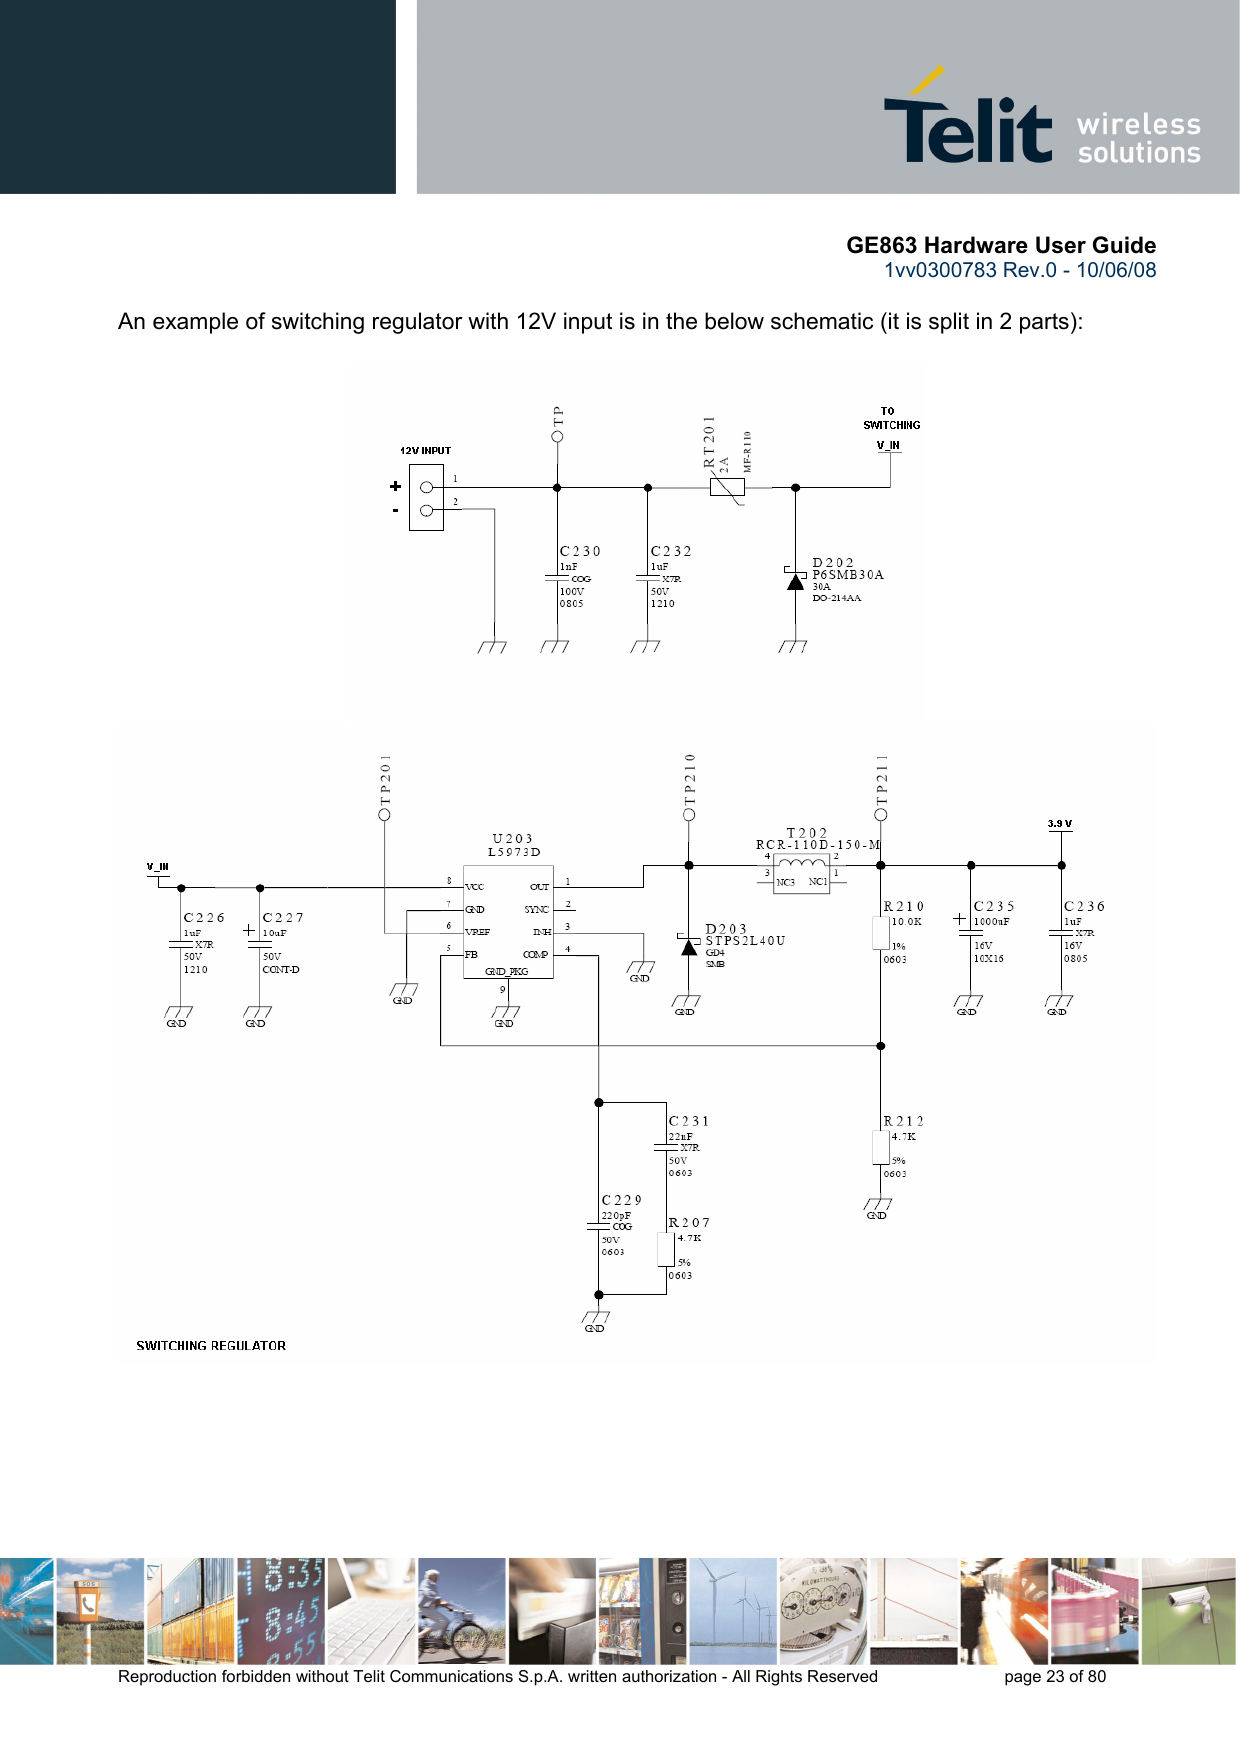       GE863 Hardware User Guide 1vv0300783 Rev.0 - 10/06/08 Reproduction forbidden without Telit Communications S.p.A. written authorization - All Rights Reserved    page 23 of 80   An example of switching regulator with 12V input is in the below schematic (it is split in 2 parts):        